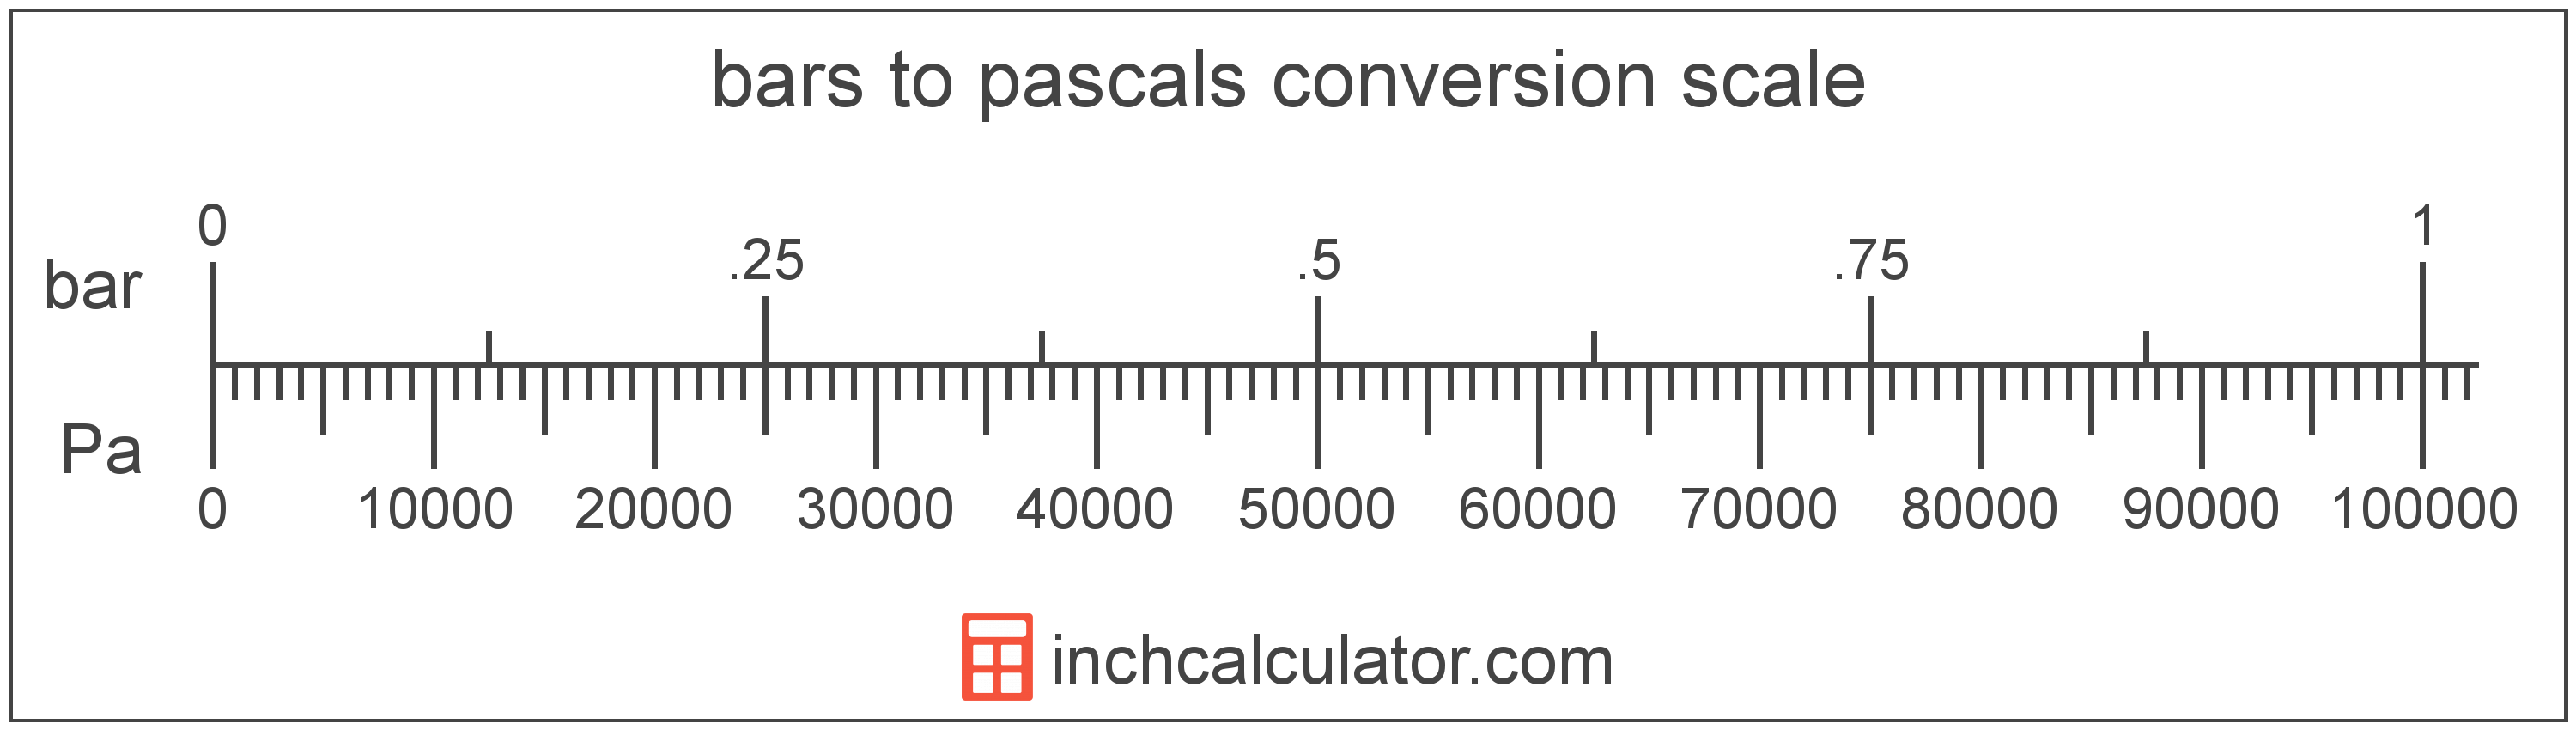 conversion scale showing bars and equivalent pascals pressure values